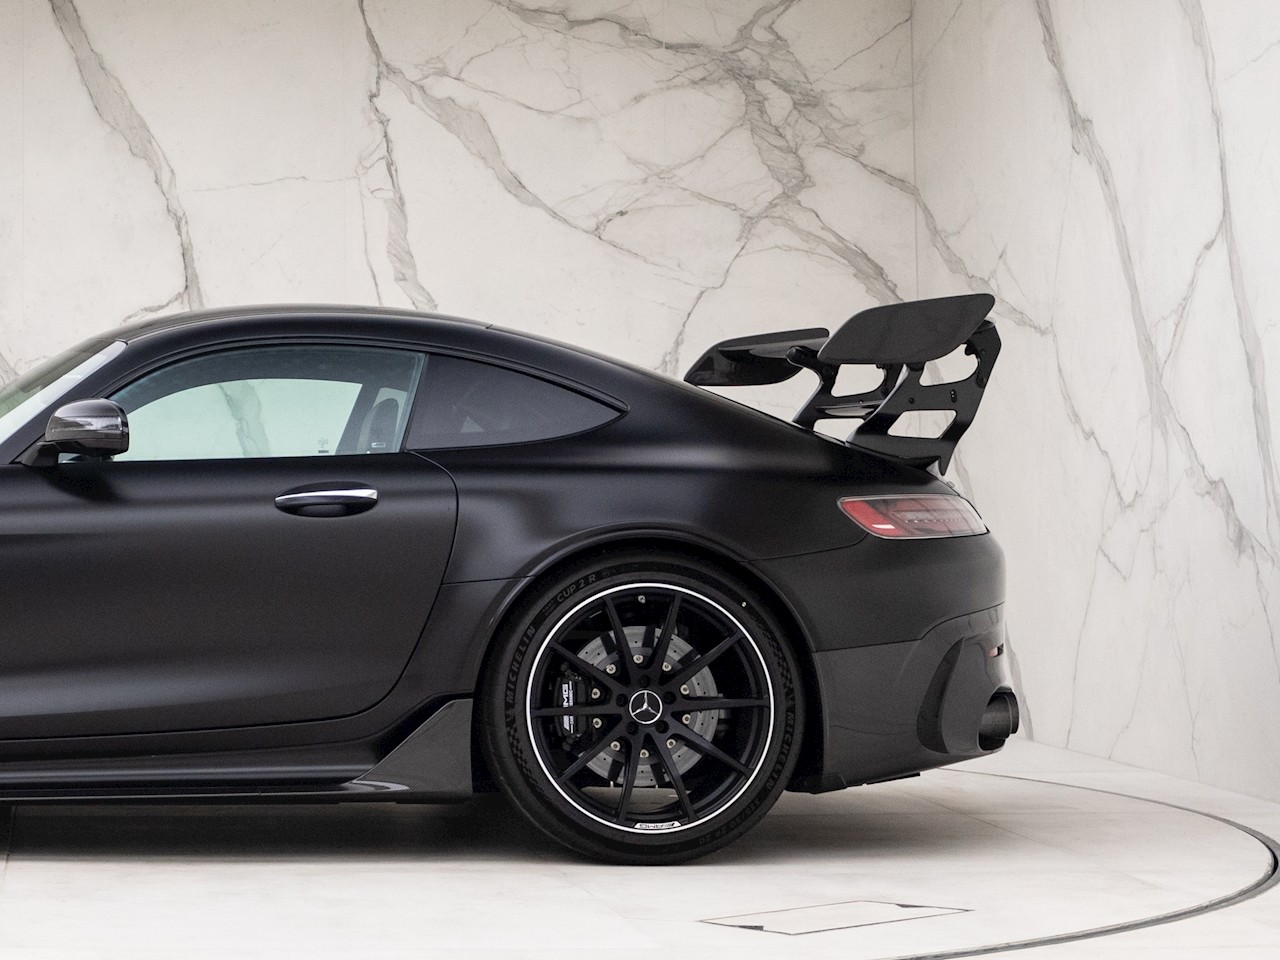 Used Mercedes-Benz Amg GT GT Black Series for sale | Obsidian 